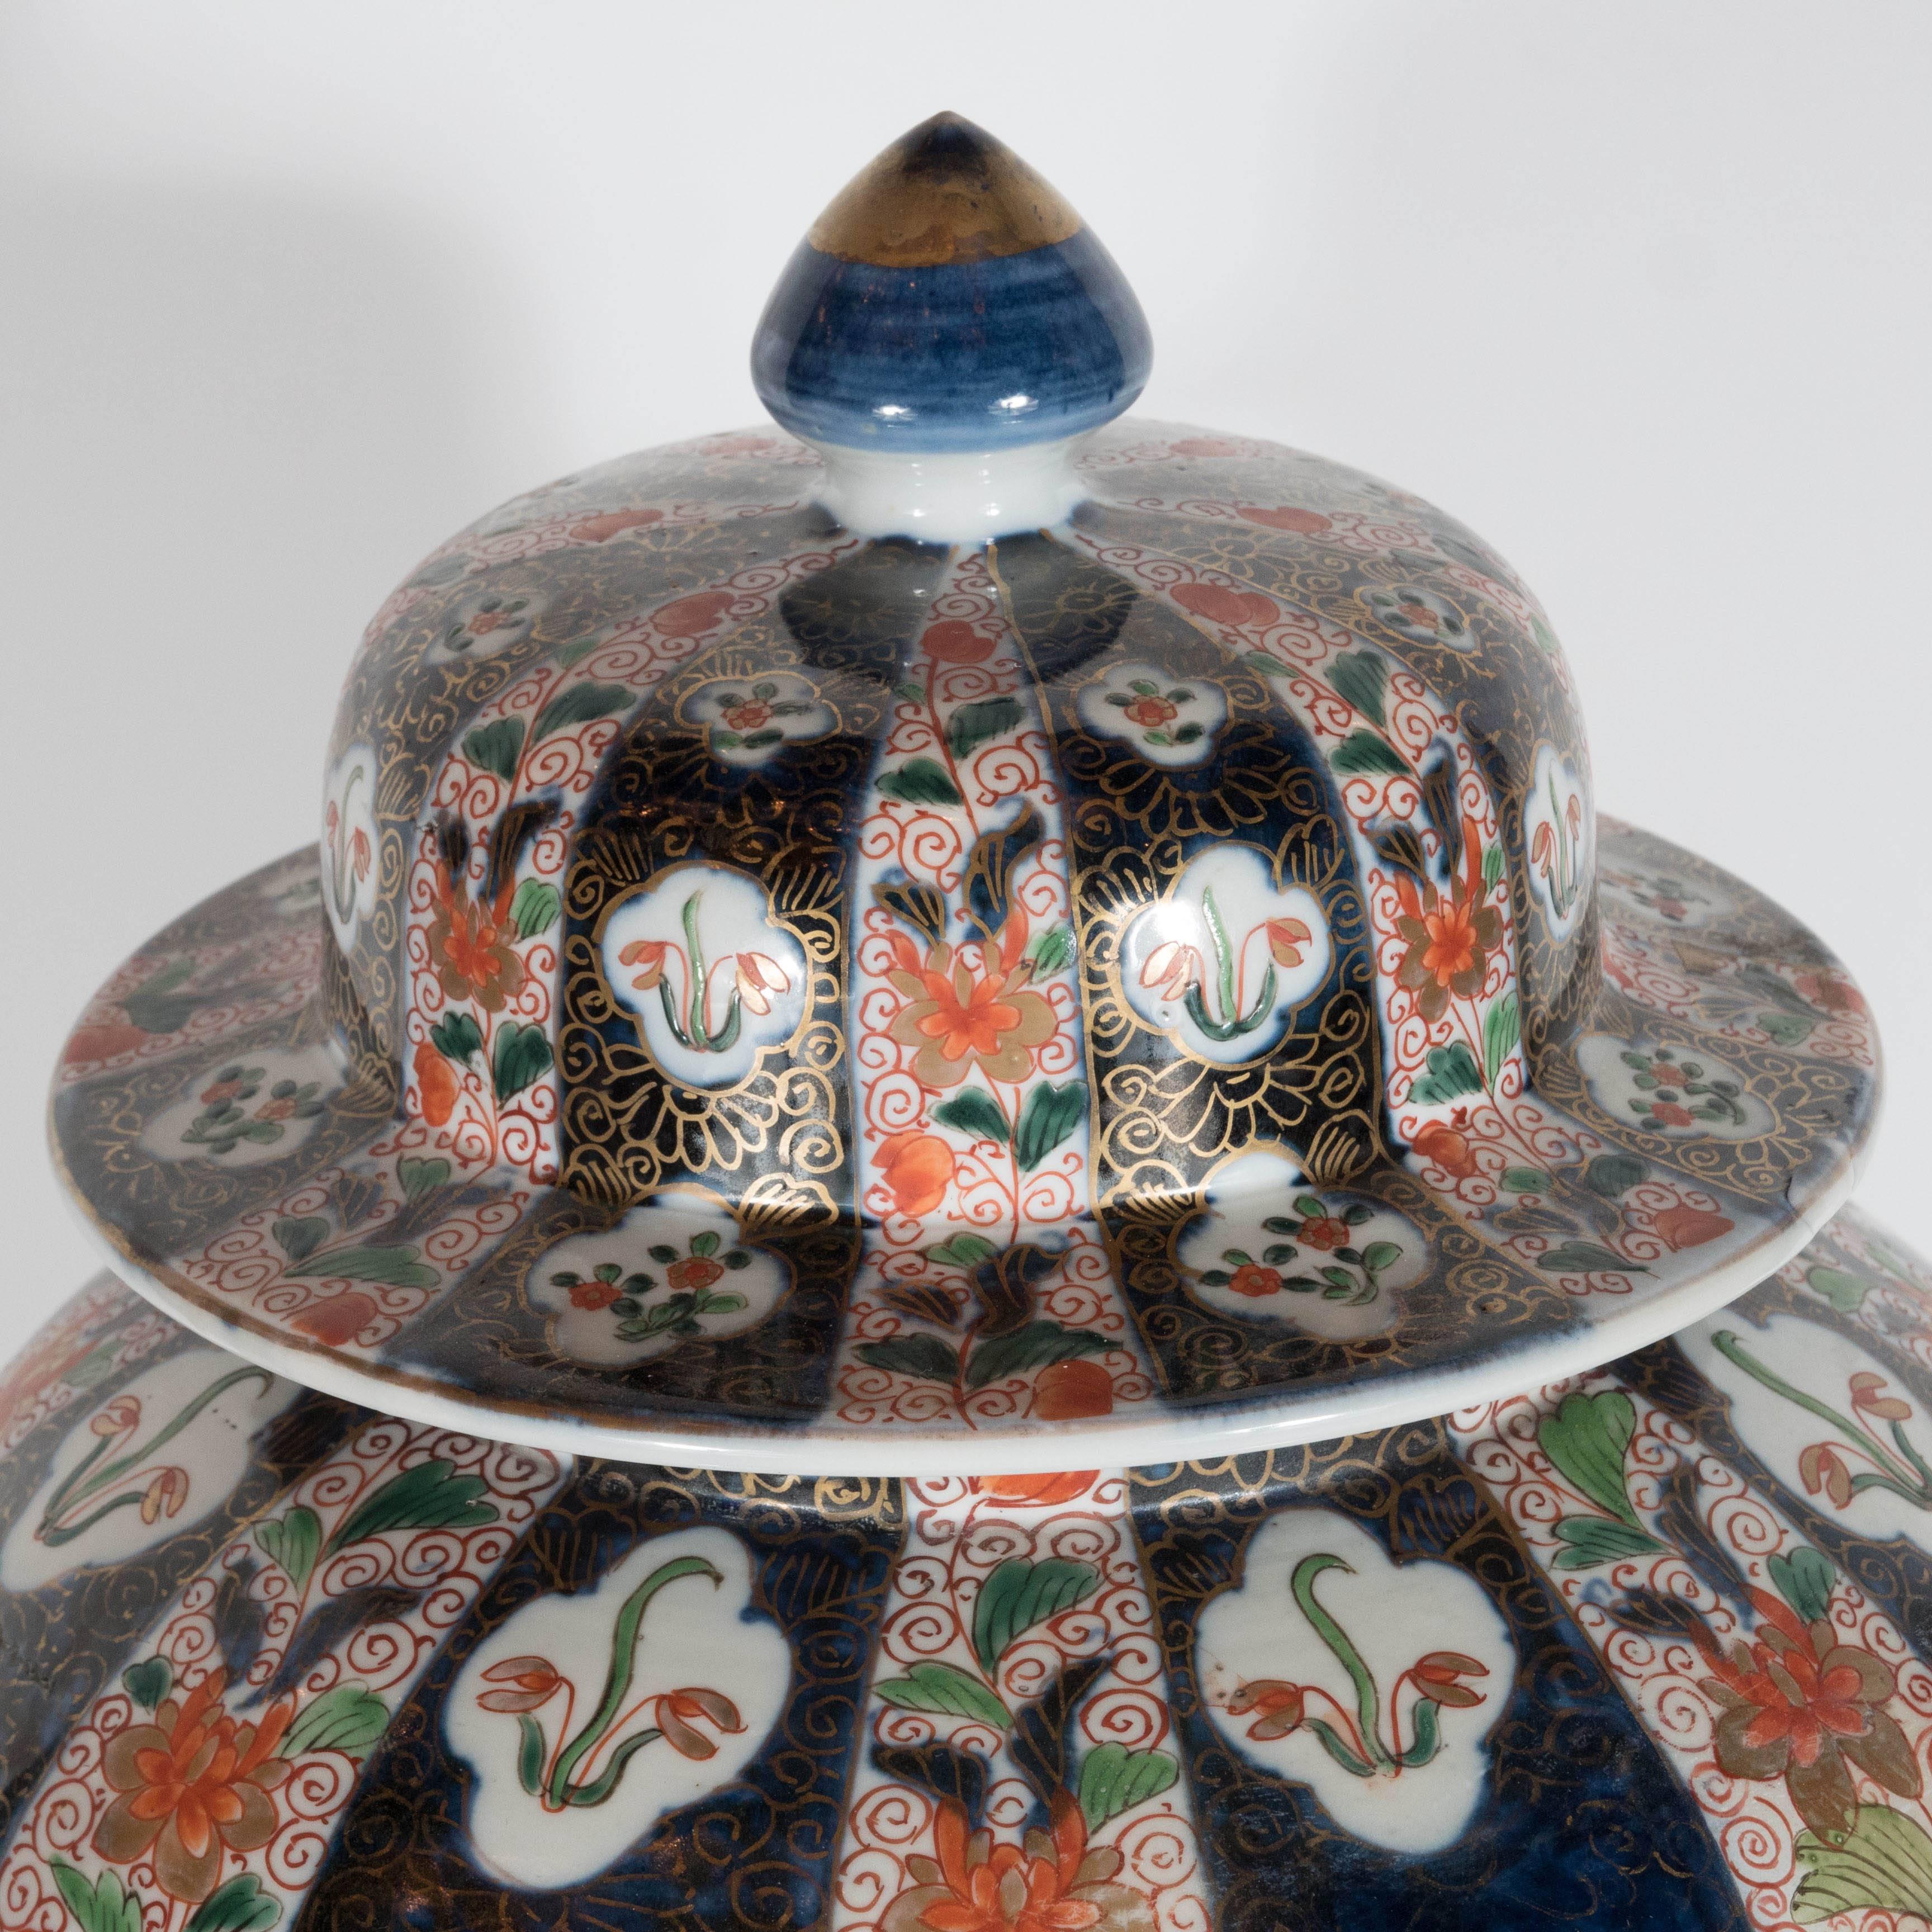 This gorgeous pair of large-scale lidded vases/ urns are decorated with a hand-painted beautiful floral /fauna and geometric decoration. The color palette is all rich jewel tones with a pearl background. These were purchased at William Doyle